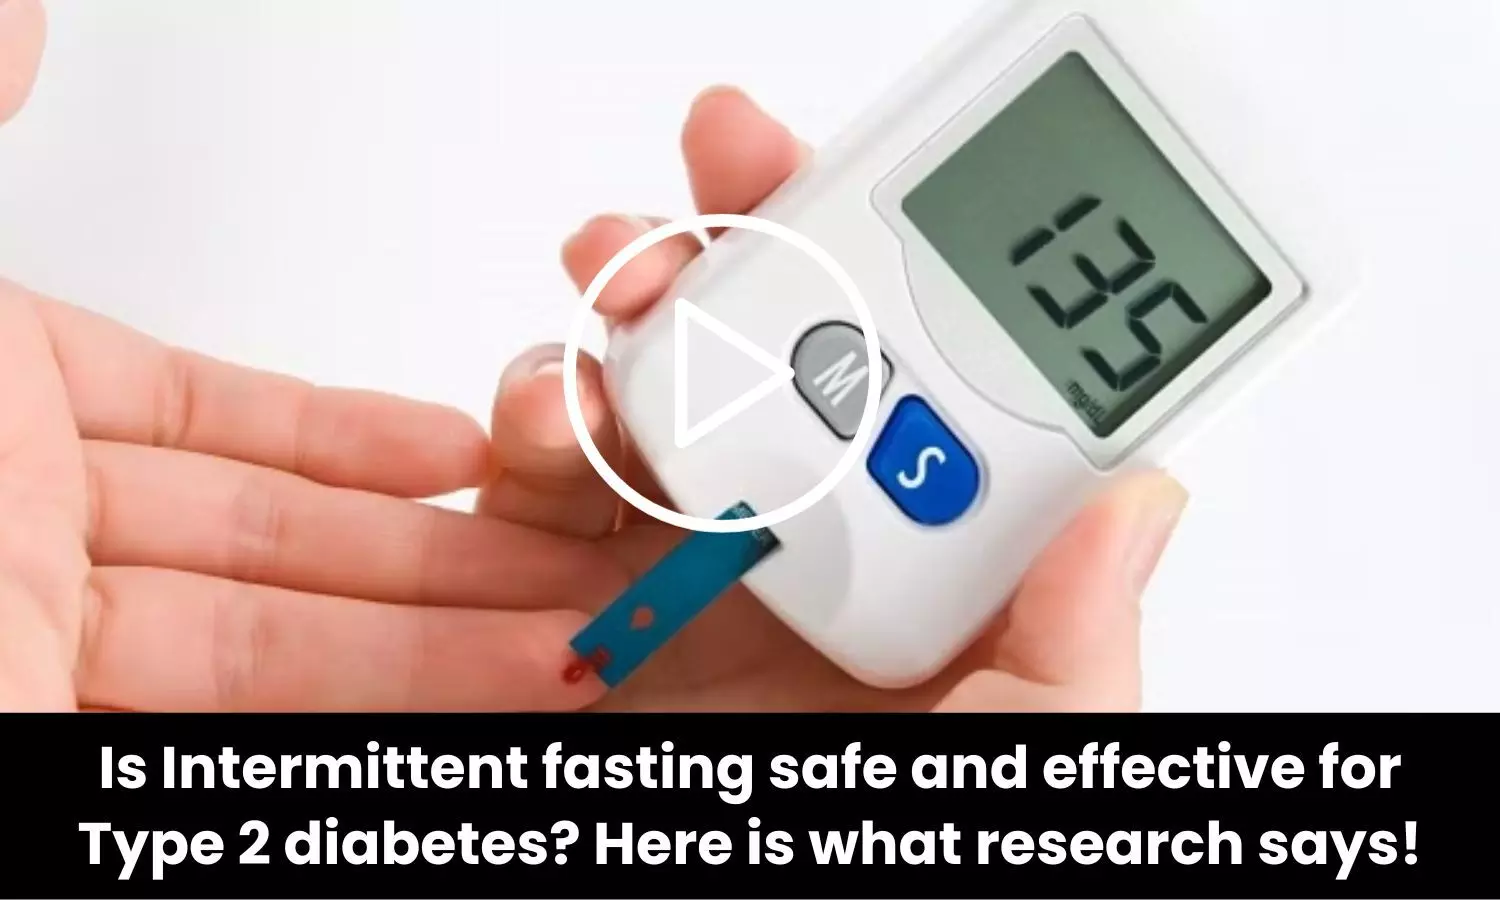 Is Intermittent fasting safe and effective for Type 2 diabetes? Here is what research says!